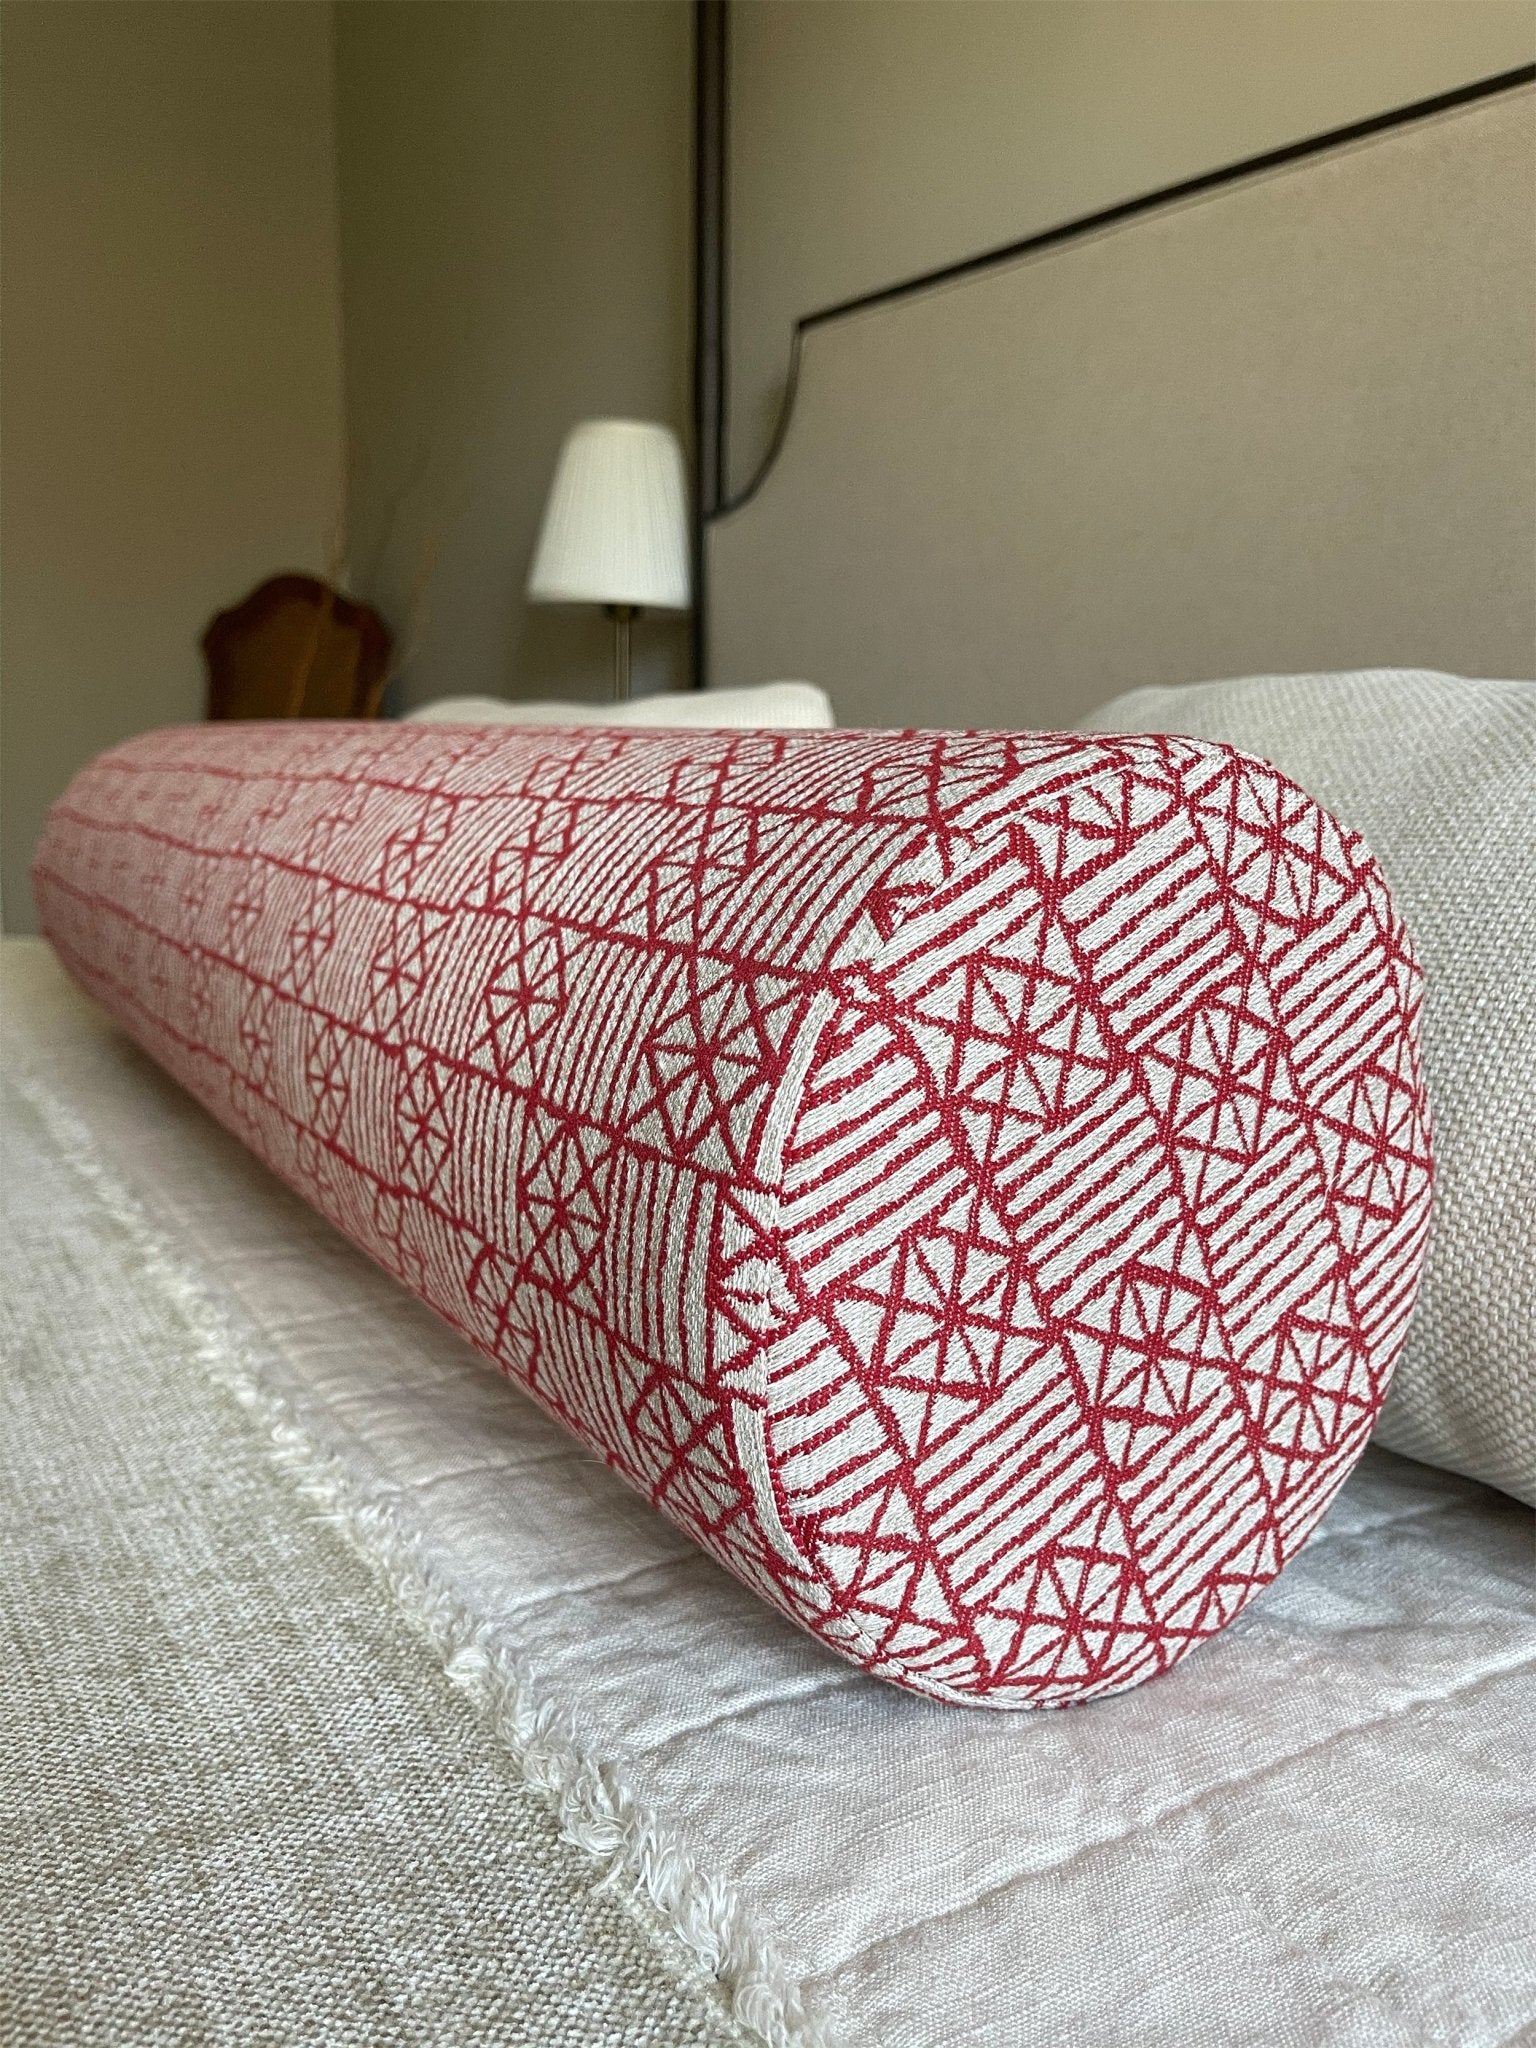 A close-up view of red geometric bolster pillow with firm foam insert add a pop of color on neutral bed